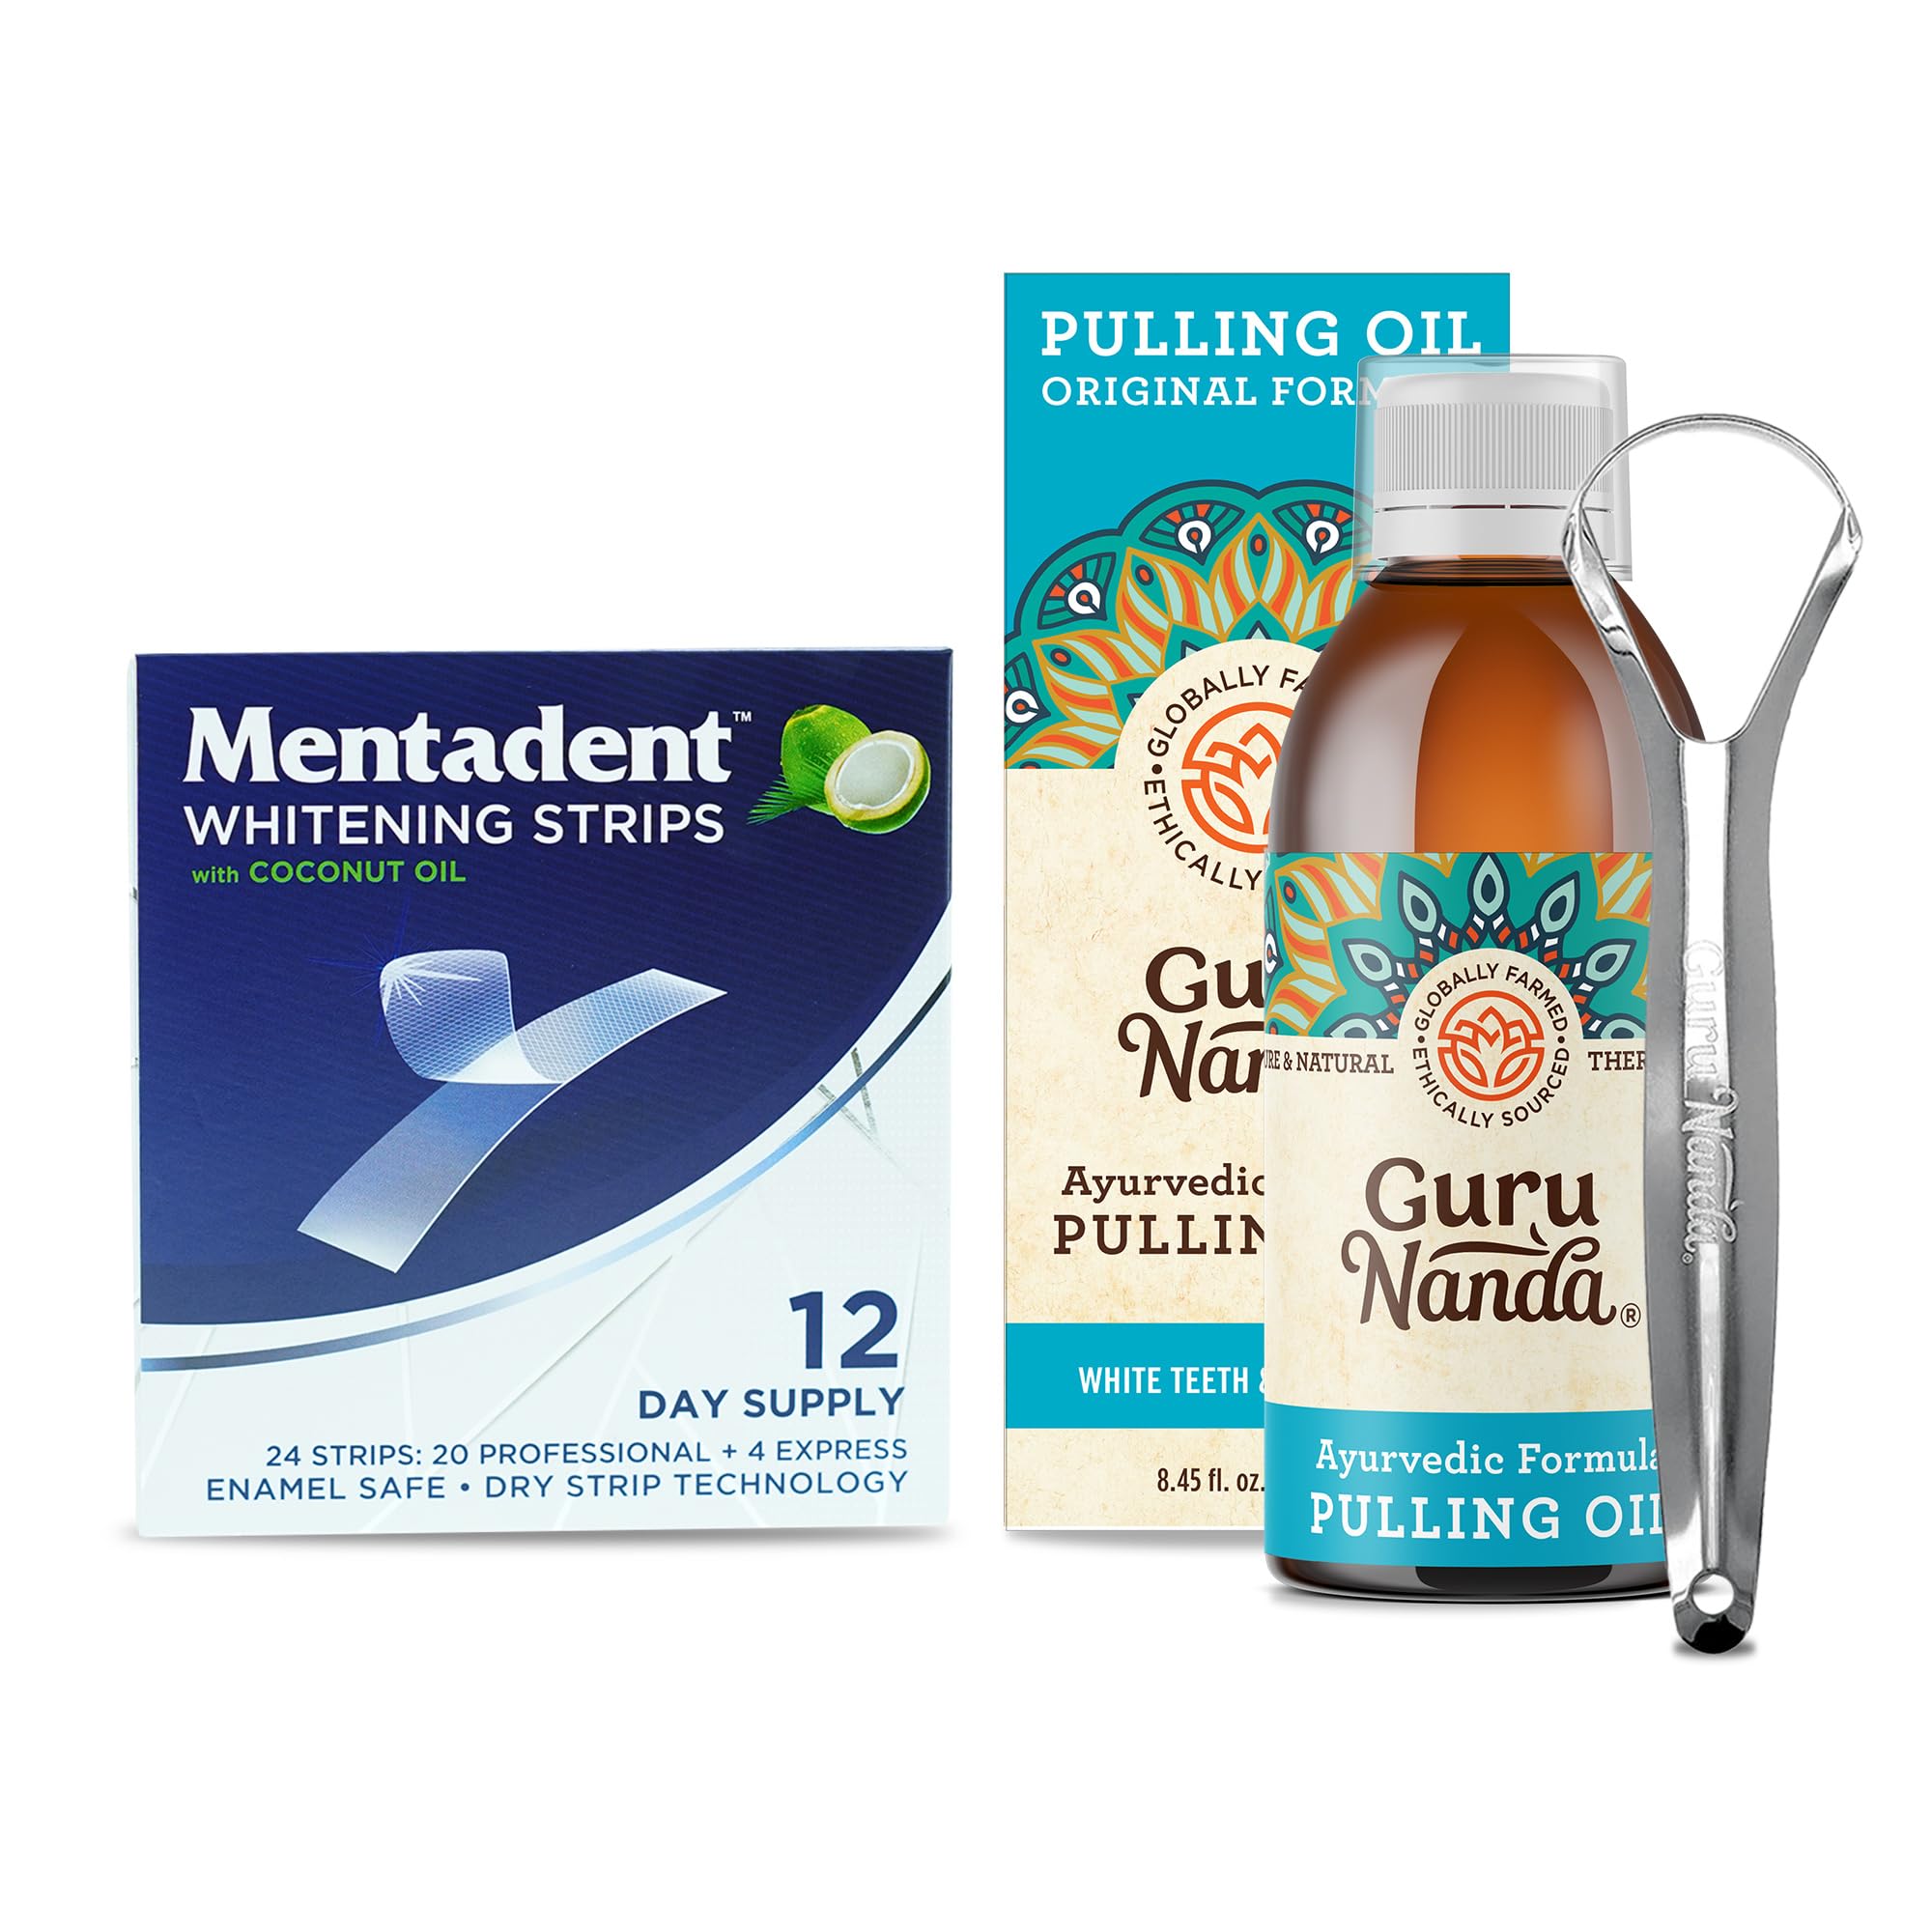 GuruNanda Original Oil Pulling Oil, Fluoride Free Vegan Natural Mouthwash & Mentadent Gentle Teeth Whitening Strips with Coconut Oil for Sensitive Teeth & Gums - 24 Pack (12 Day Supply)